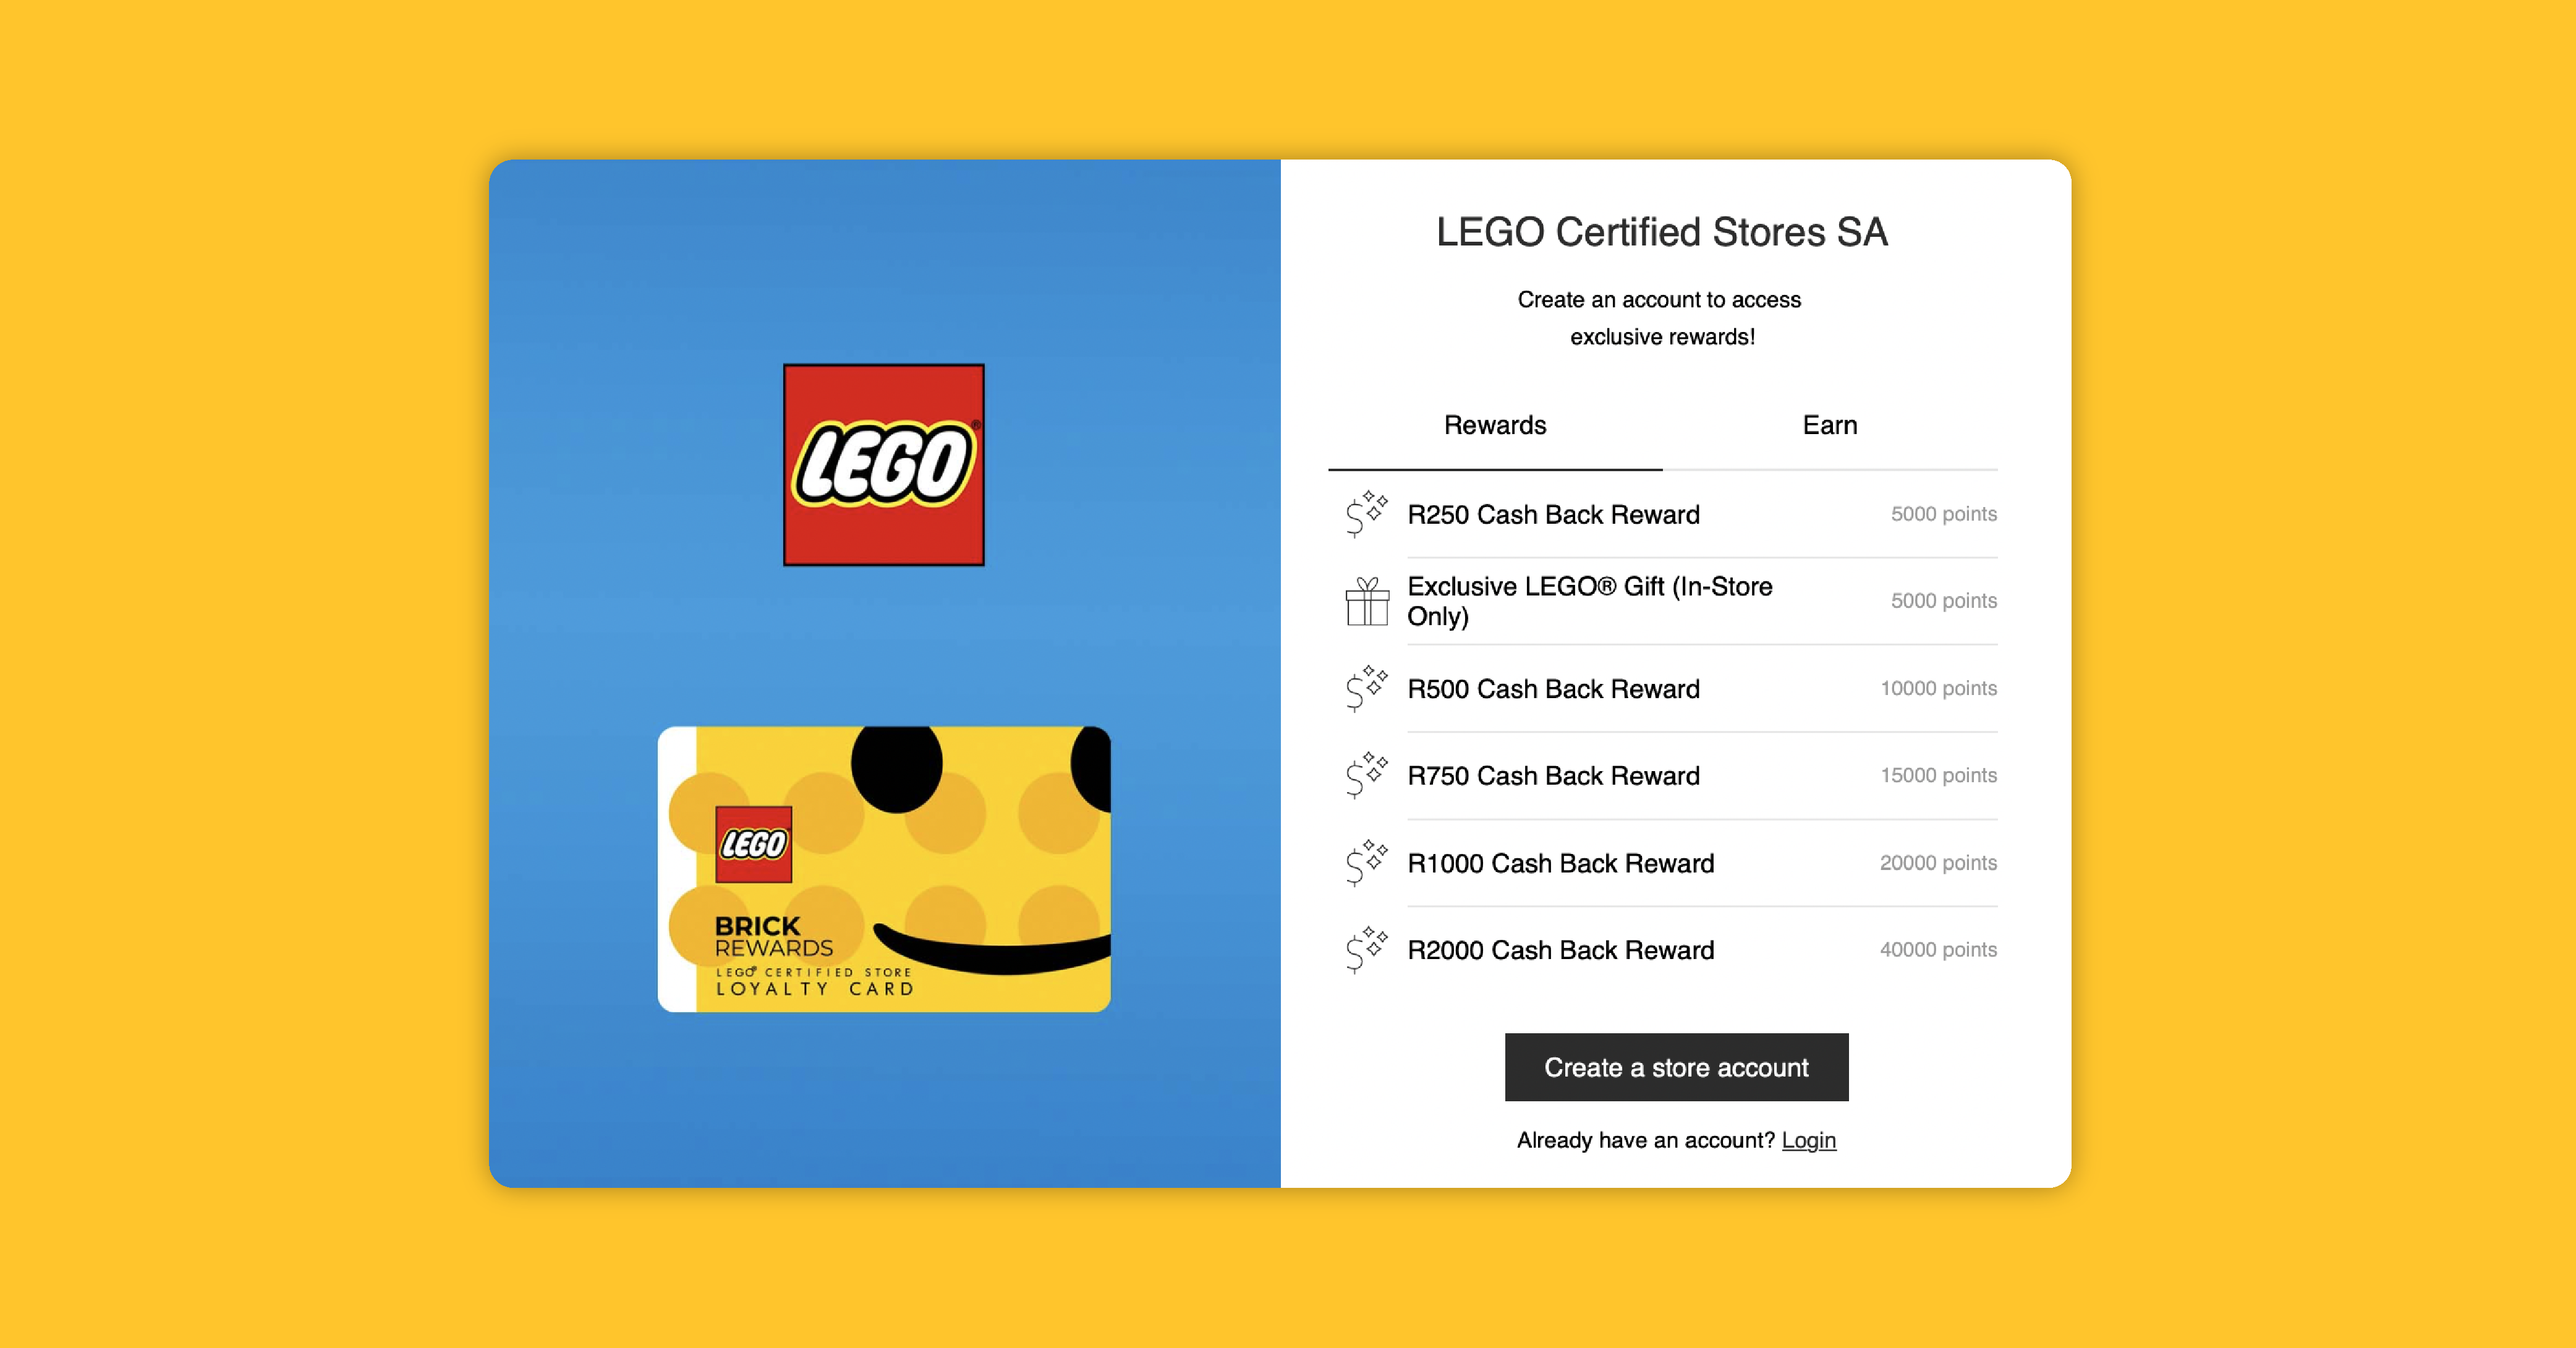 LEGO Certified Stores' loyalty widget on a bright yellow background